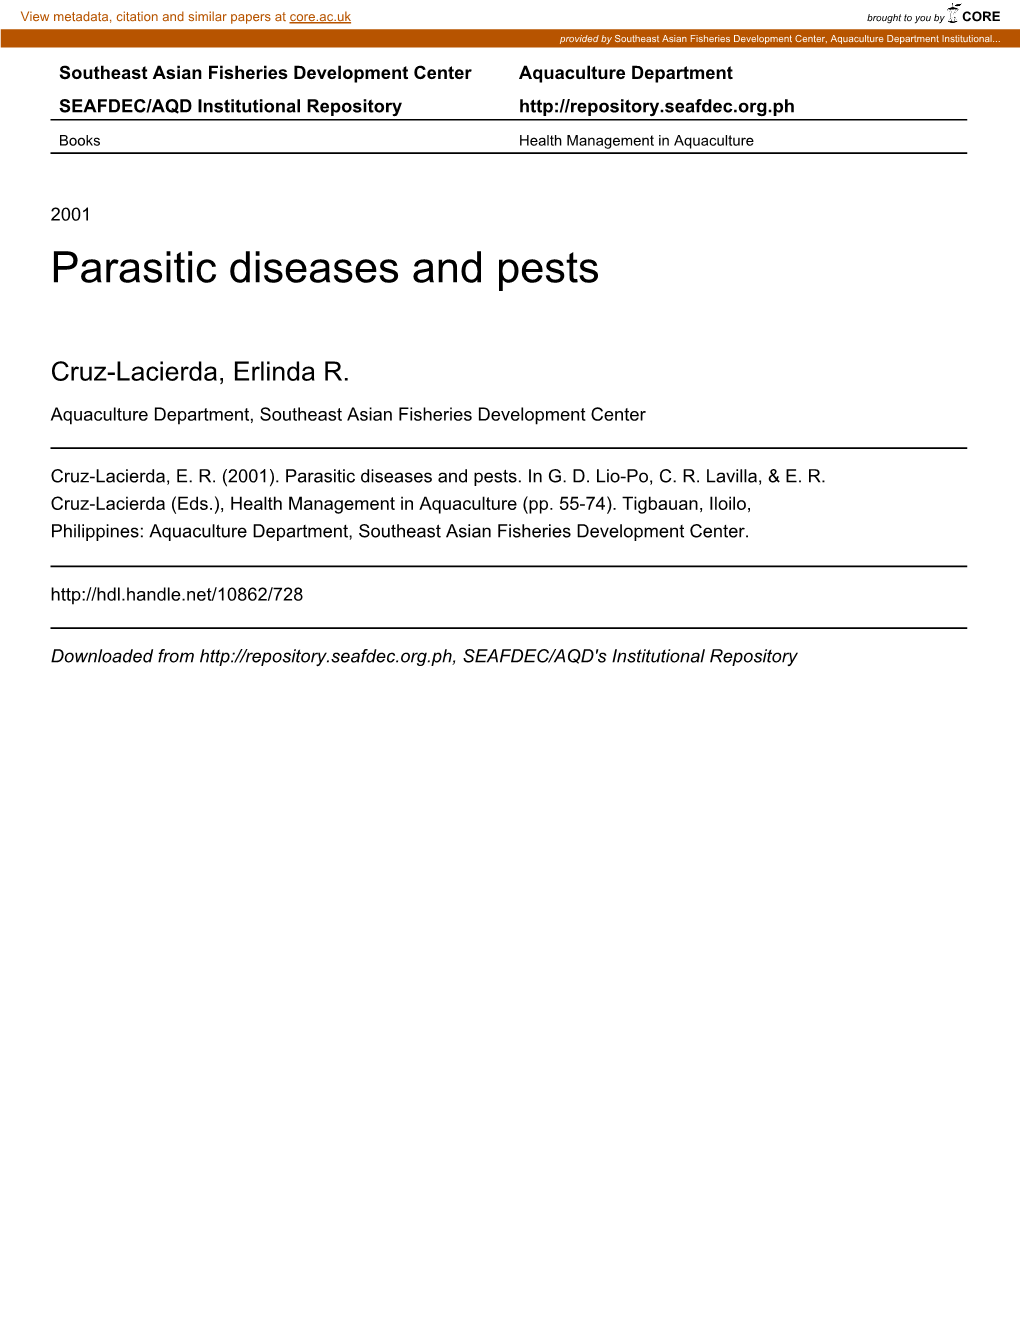 Parasitic Diseases and Pests